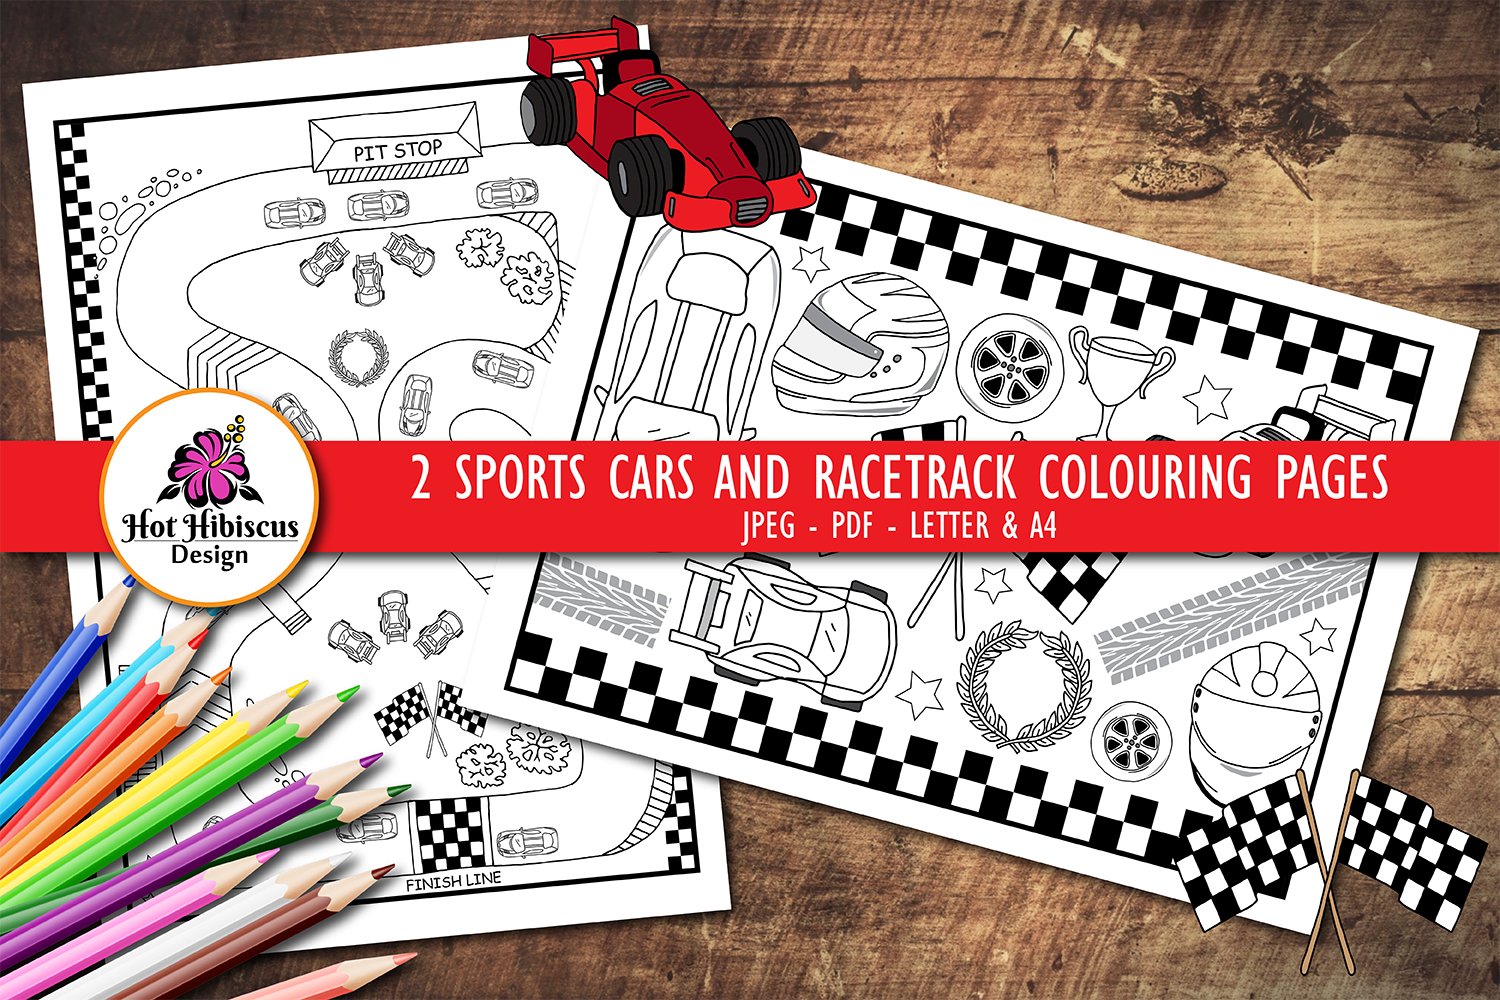 Racing cars racetrack motorsport printable colouring pages